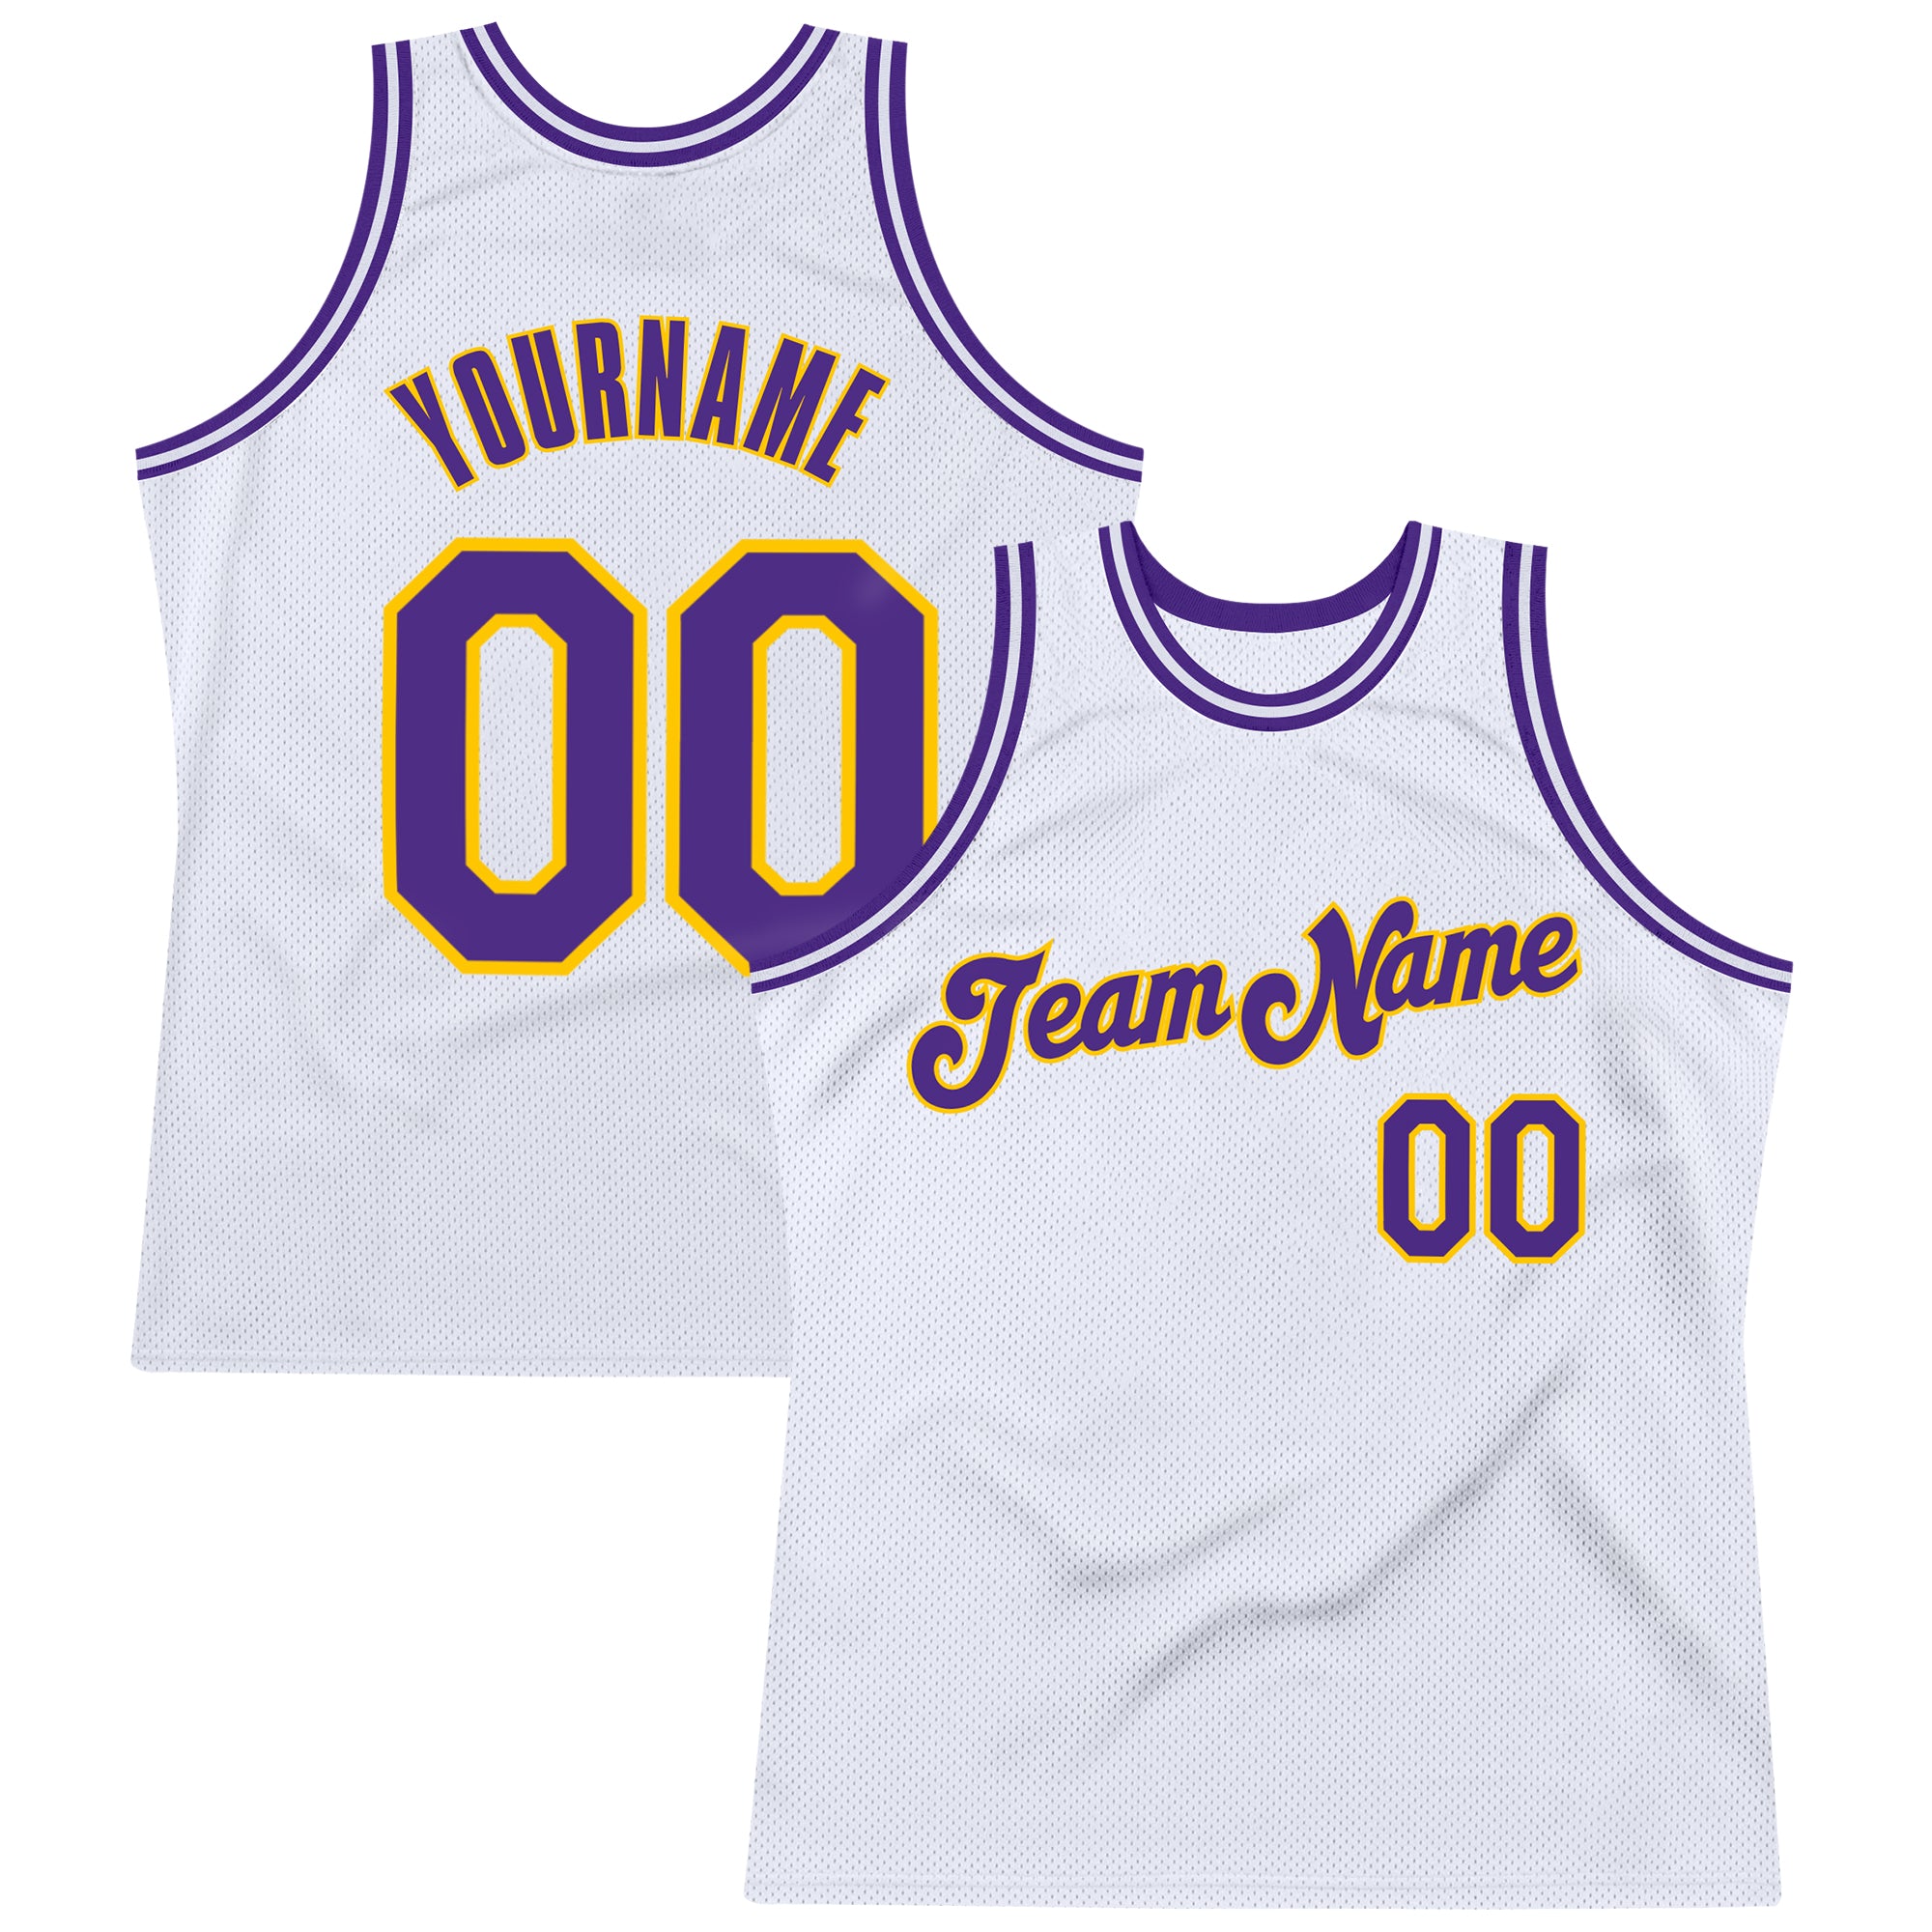 design purple and white basketball jersey